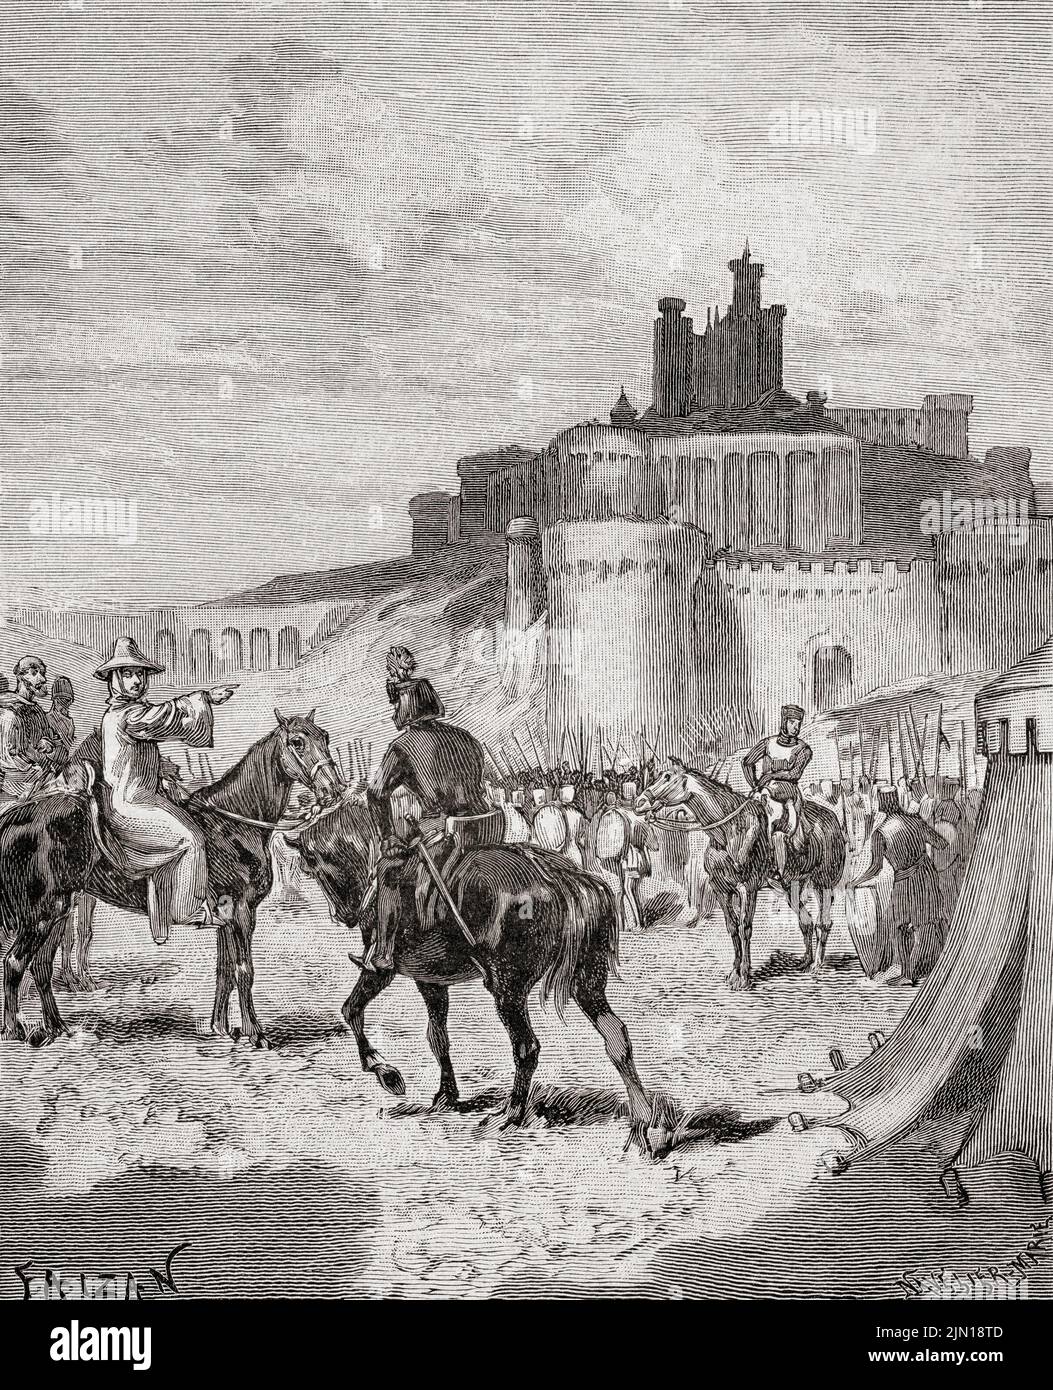 The Abbot of Citeaux, Arnaud Amalric and the Crusader army on the outskirts of Beziers before the Massacre at Beziers, 22 July 1209, during The Albigensian Crusade or the Cathar Crusade.   Amalric, when asked how to distinguish Cathars from Catholics, responded, 'Kill them all! God will know his own.'  From Histoire de France, published 1855. Stock Photo